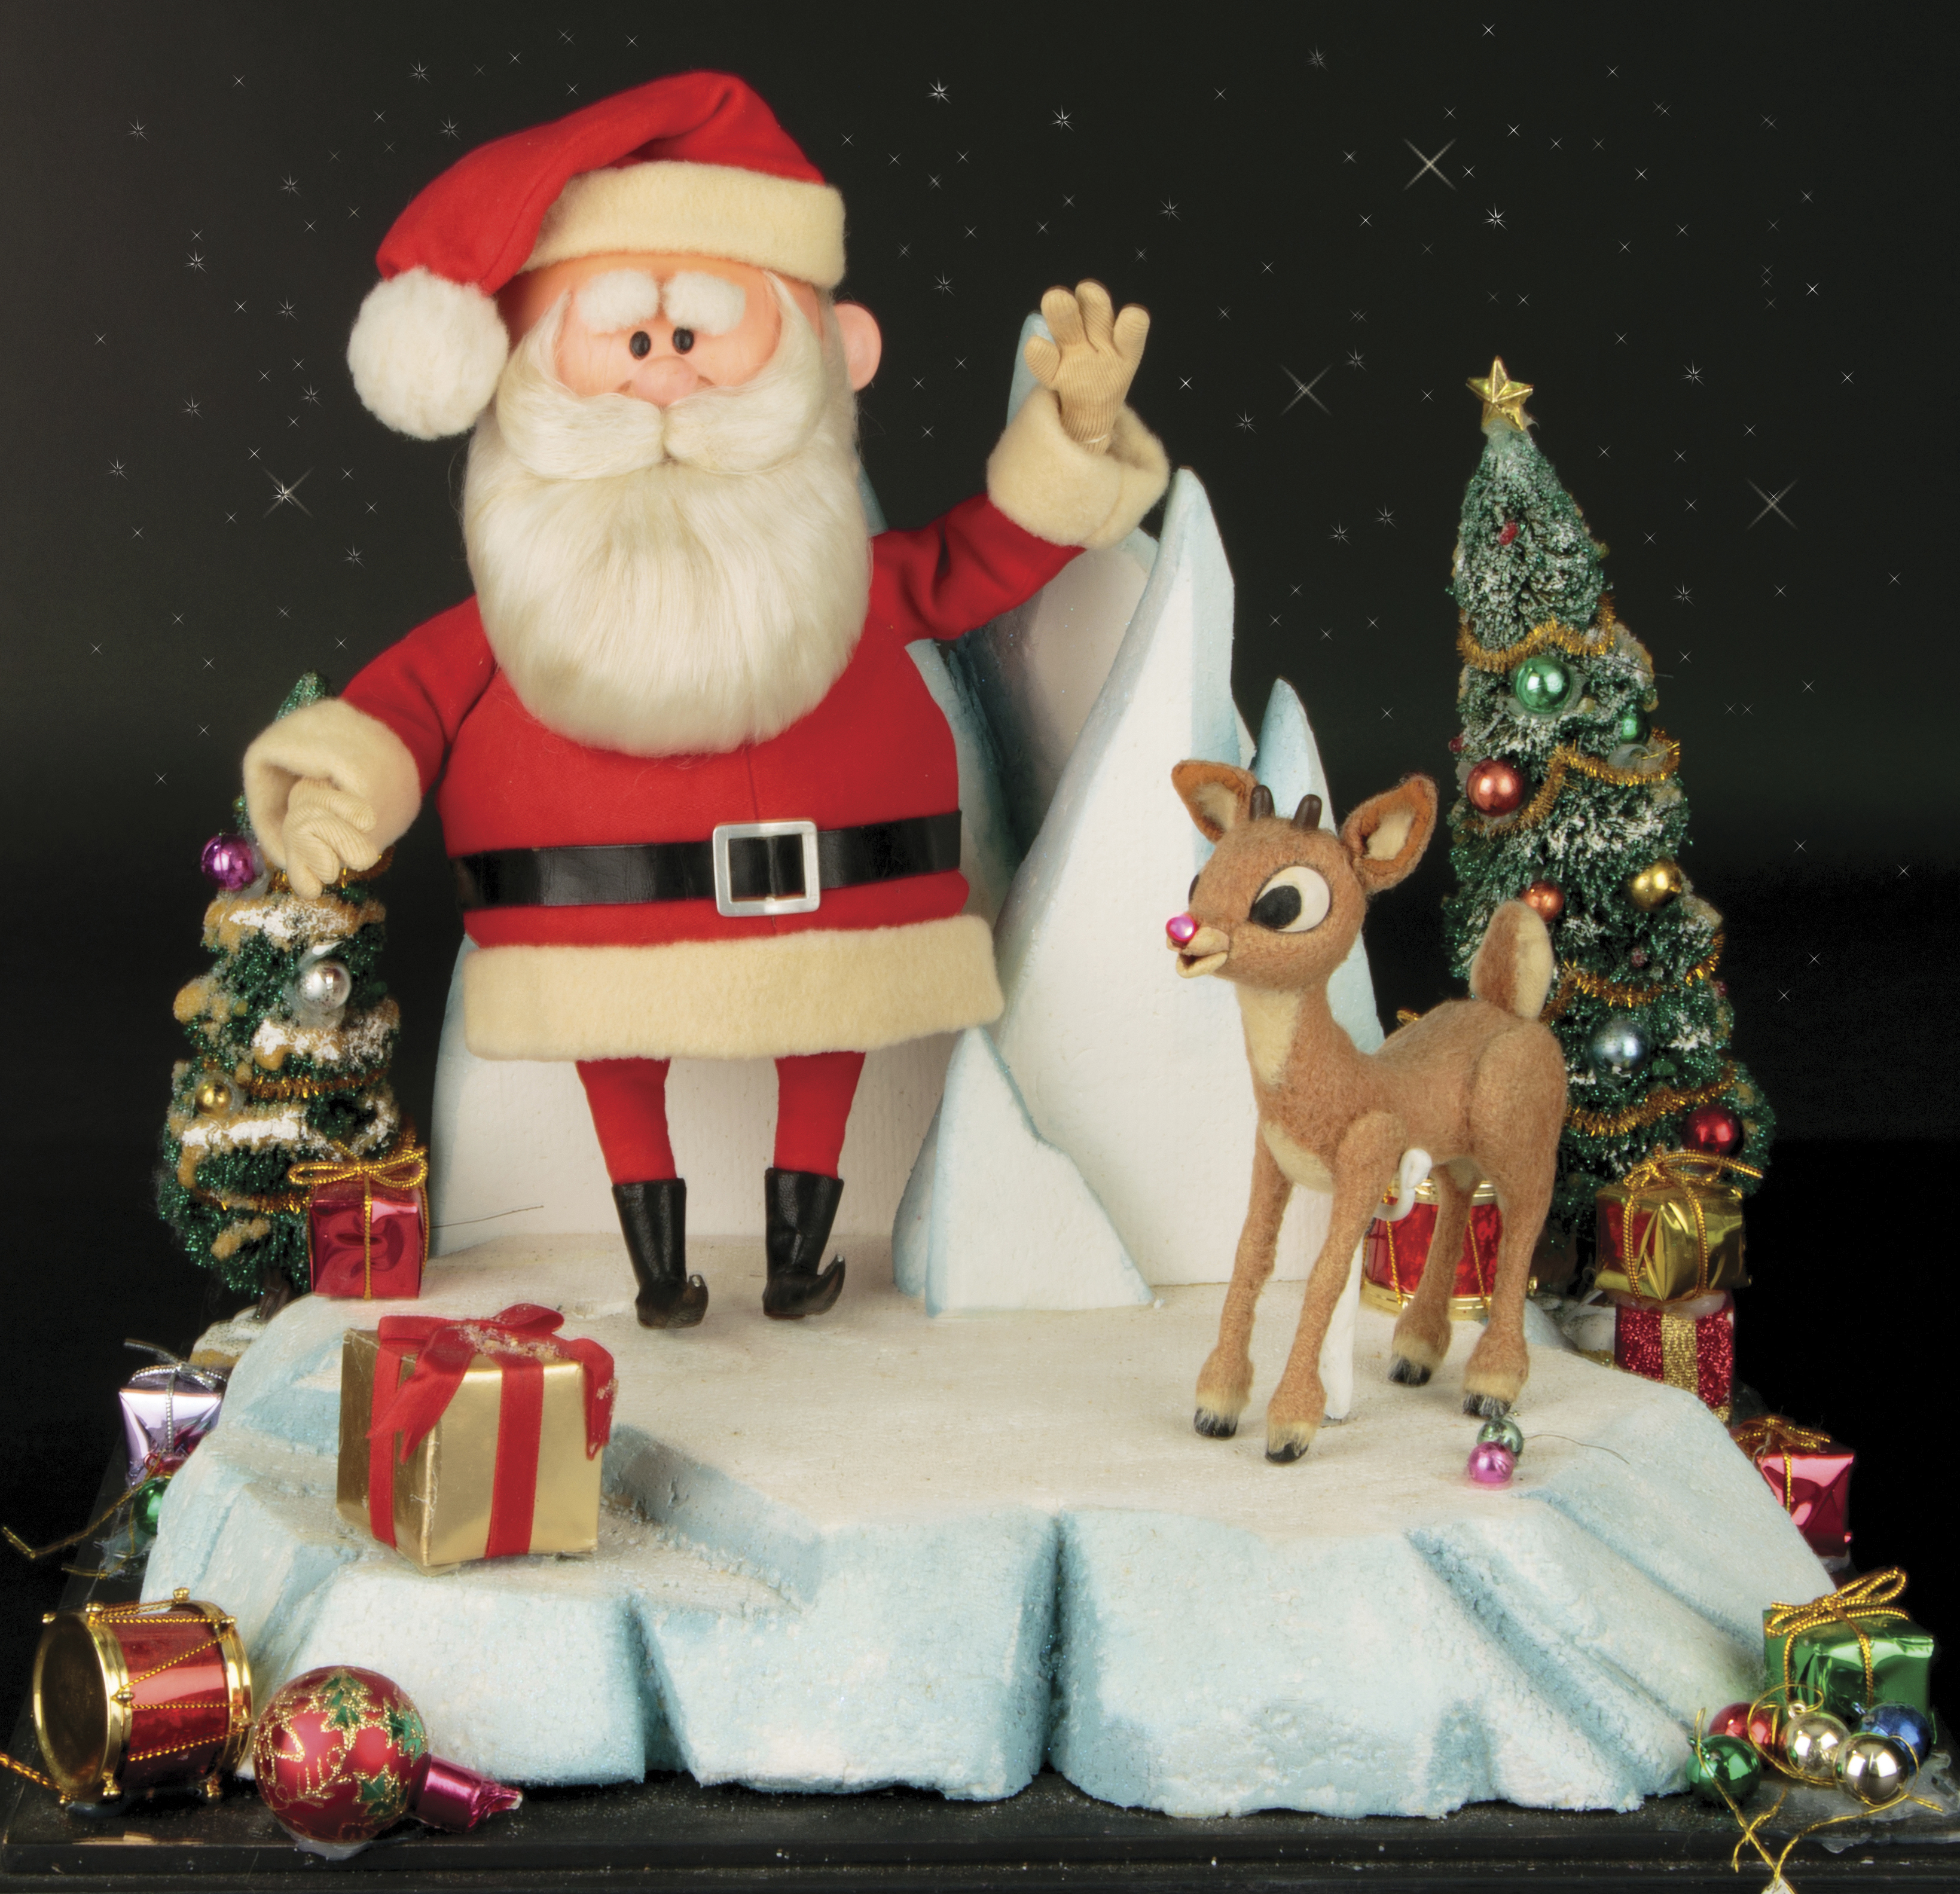 Santa and Rudolph figures